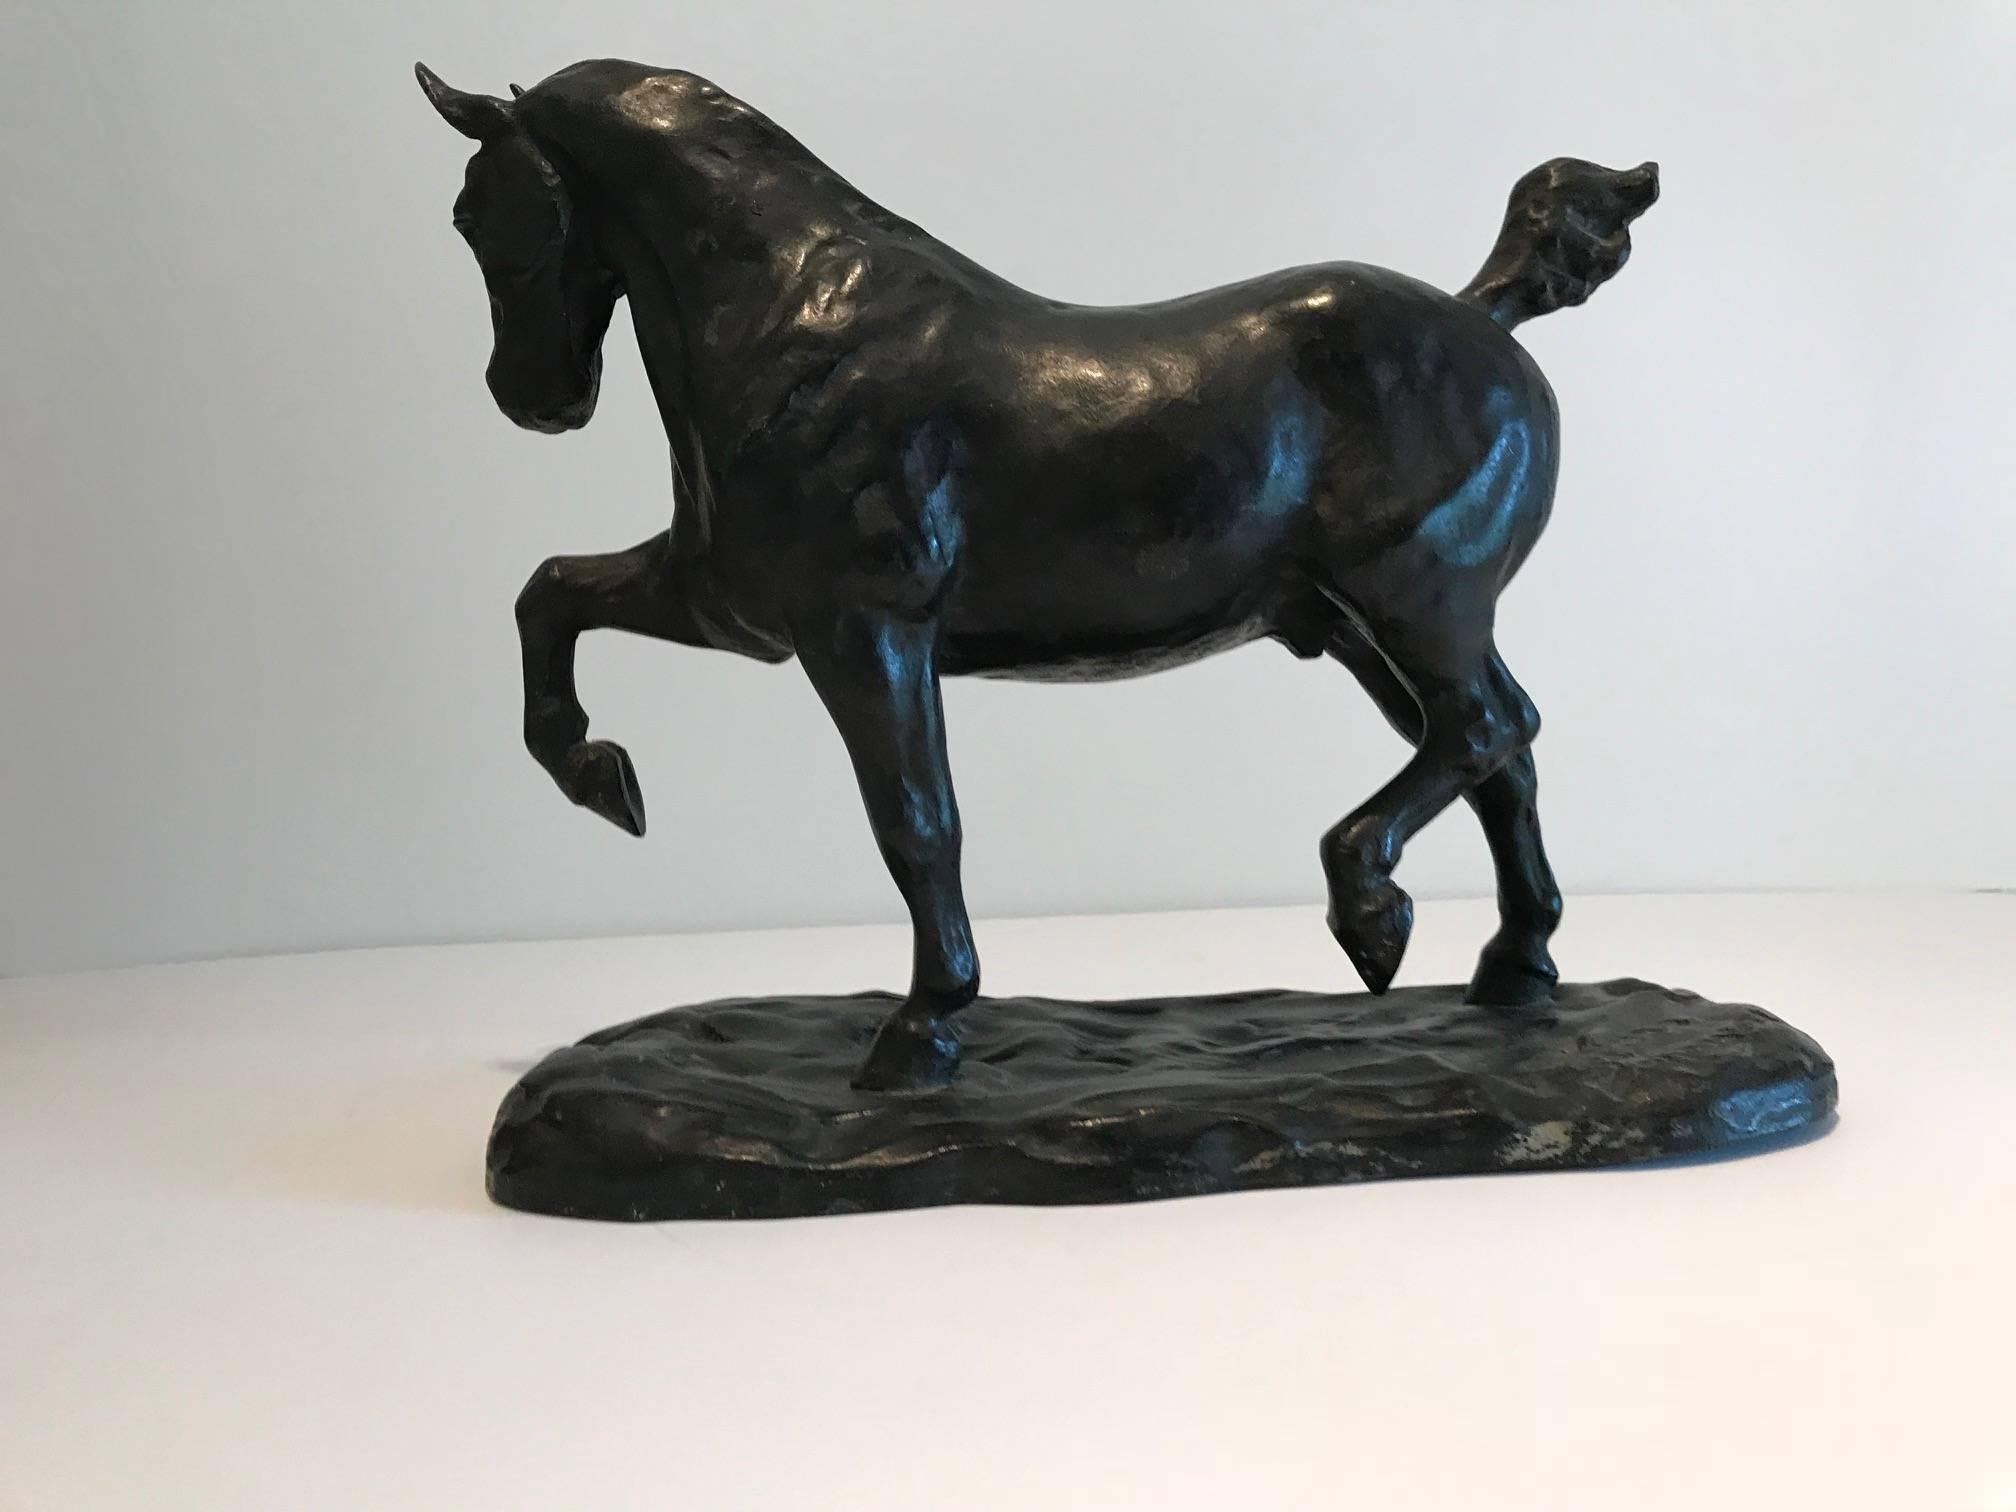 a very fine European bronze of a dressage horse , of great casting quality and remarkable expression, dated 1932
signed illegibly by a talented animalier sculptor